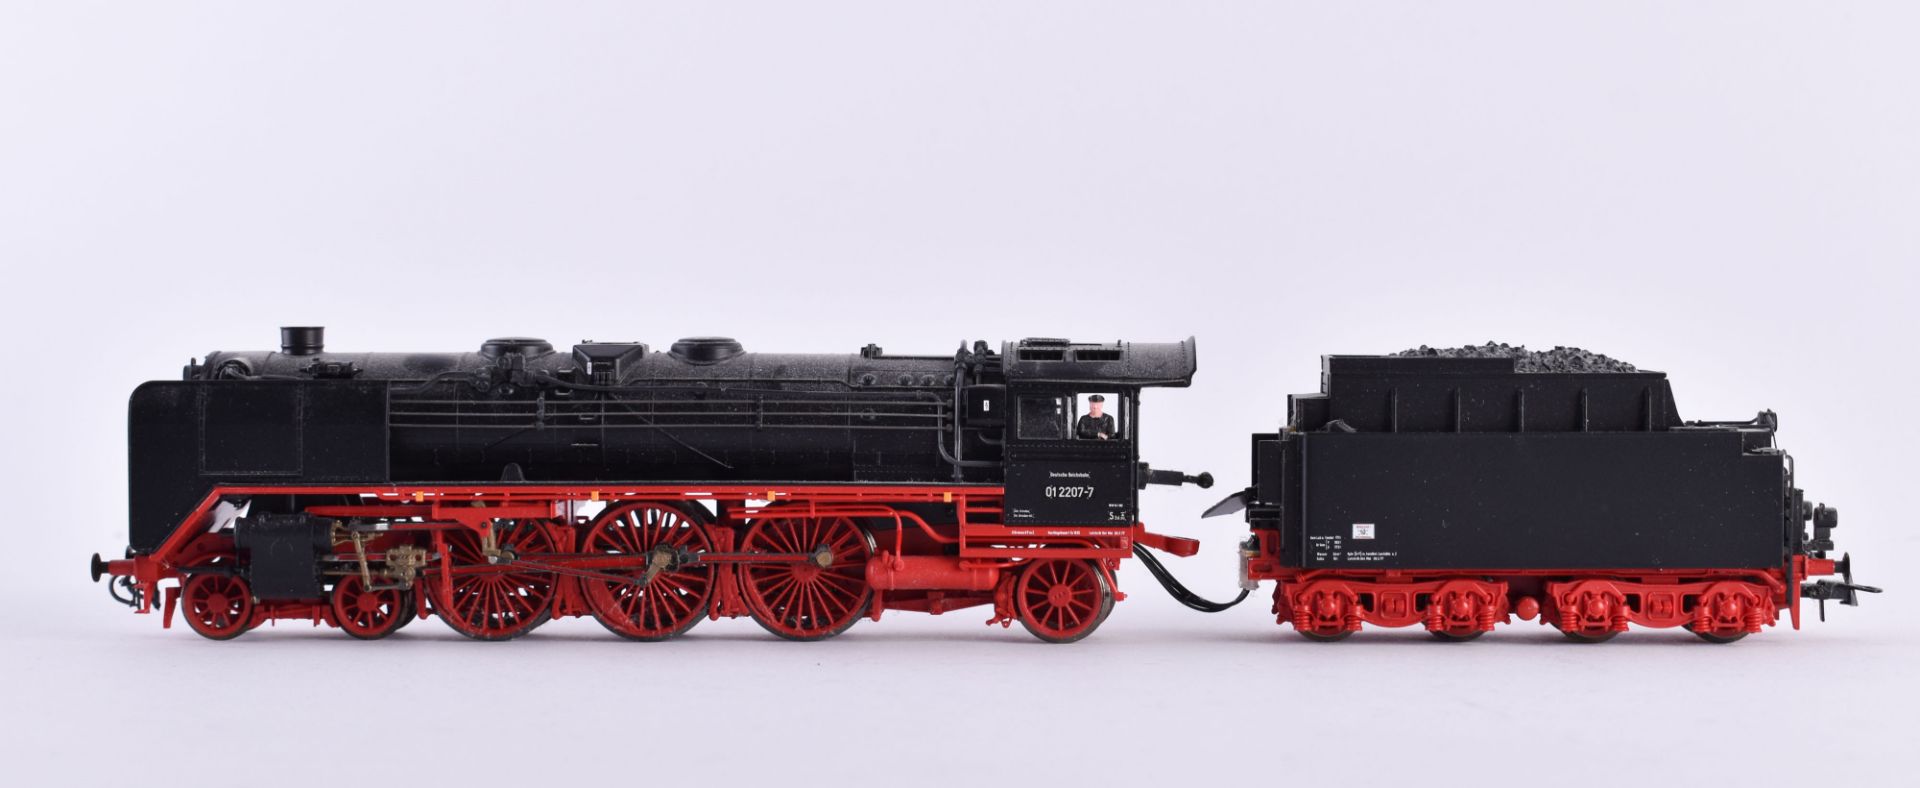 Steam locomotive with tender BR 01 2207-7 of the DR-Roco